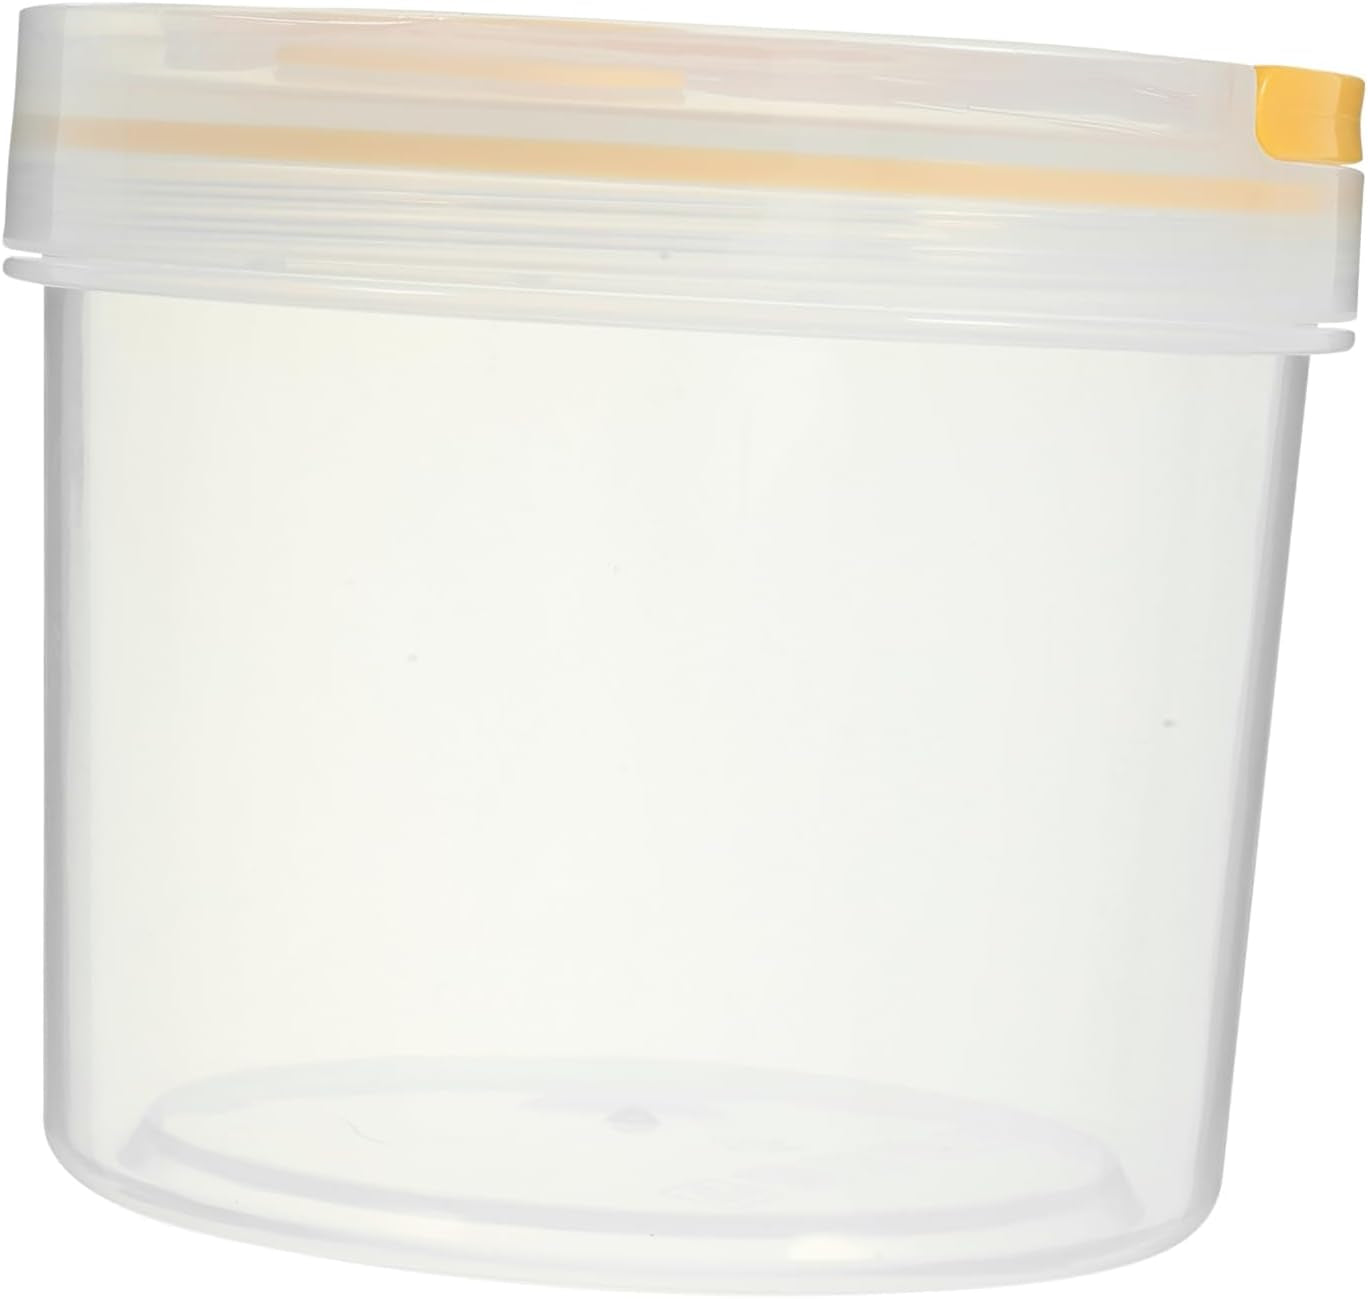 Box Toast Storage Box Cereal Container Kitchen Storage Canister Grain Storage Canister Plastic Grain Jar Plastic Storage Containers with Lids Food Plastic Jar  TIDTALEO As Shown 2  